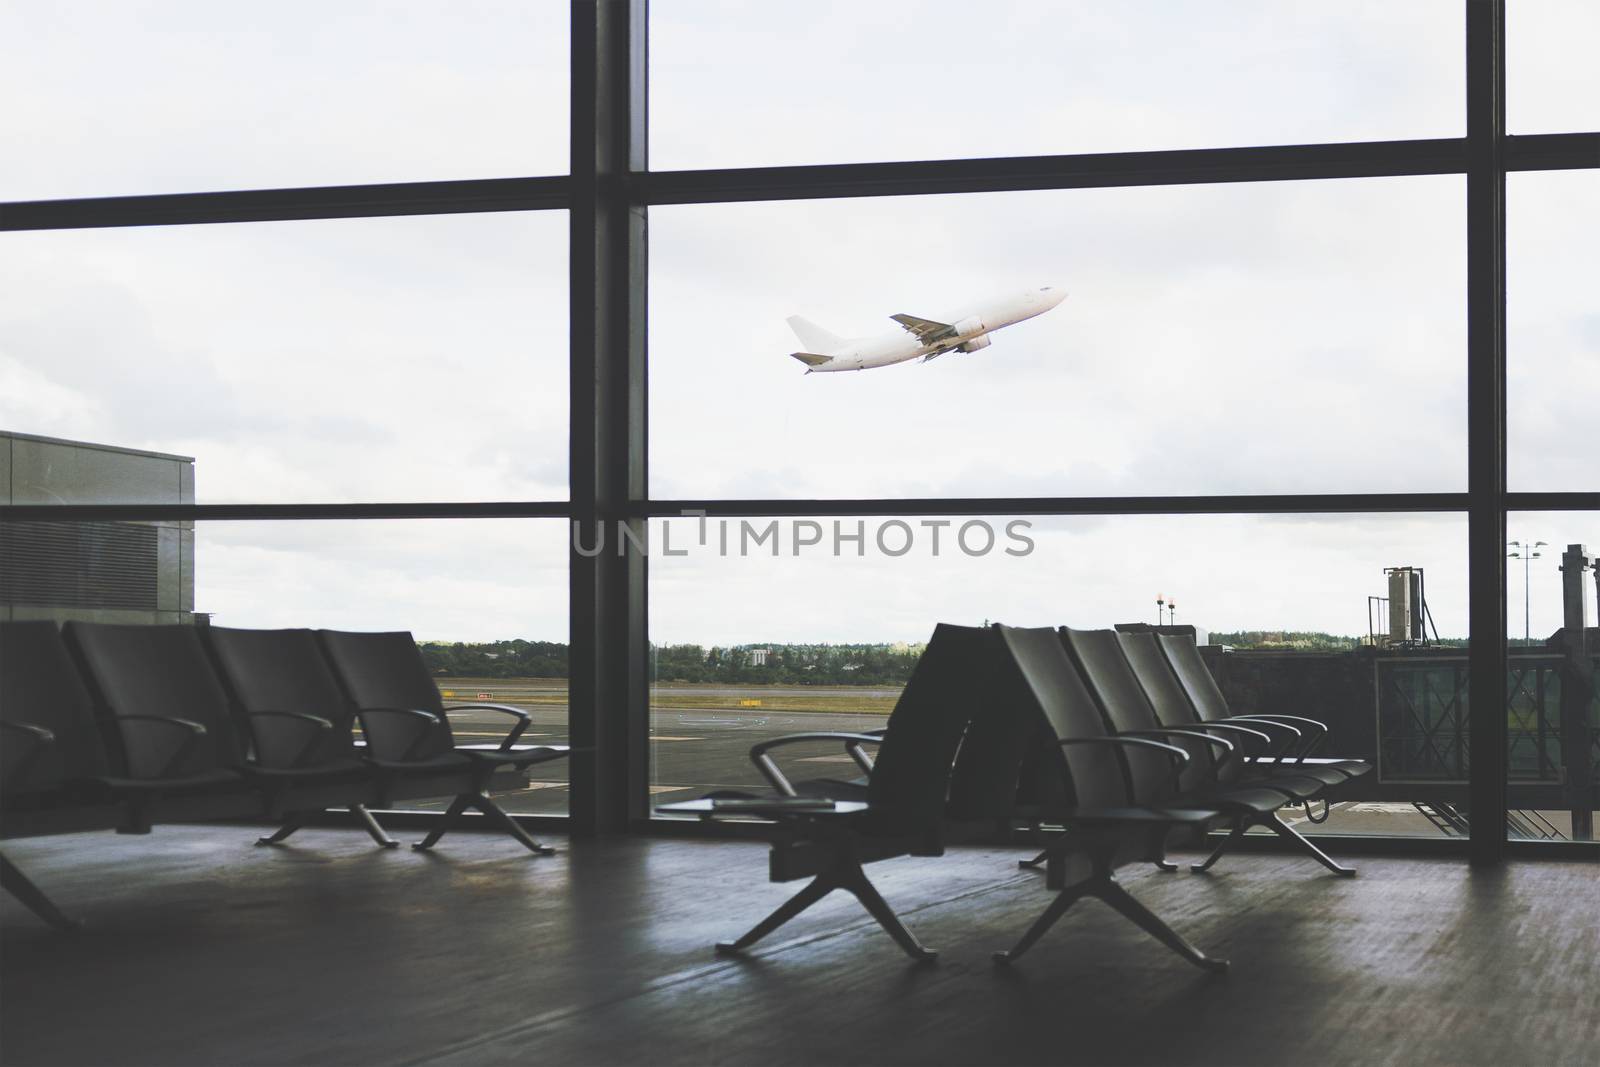 Plane takes off at the airport by wdnet_studio